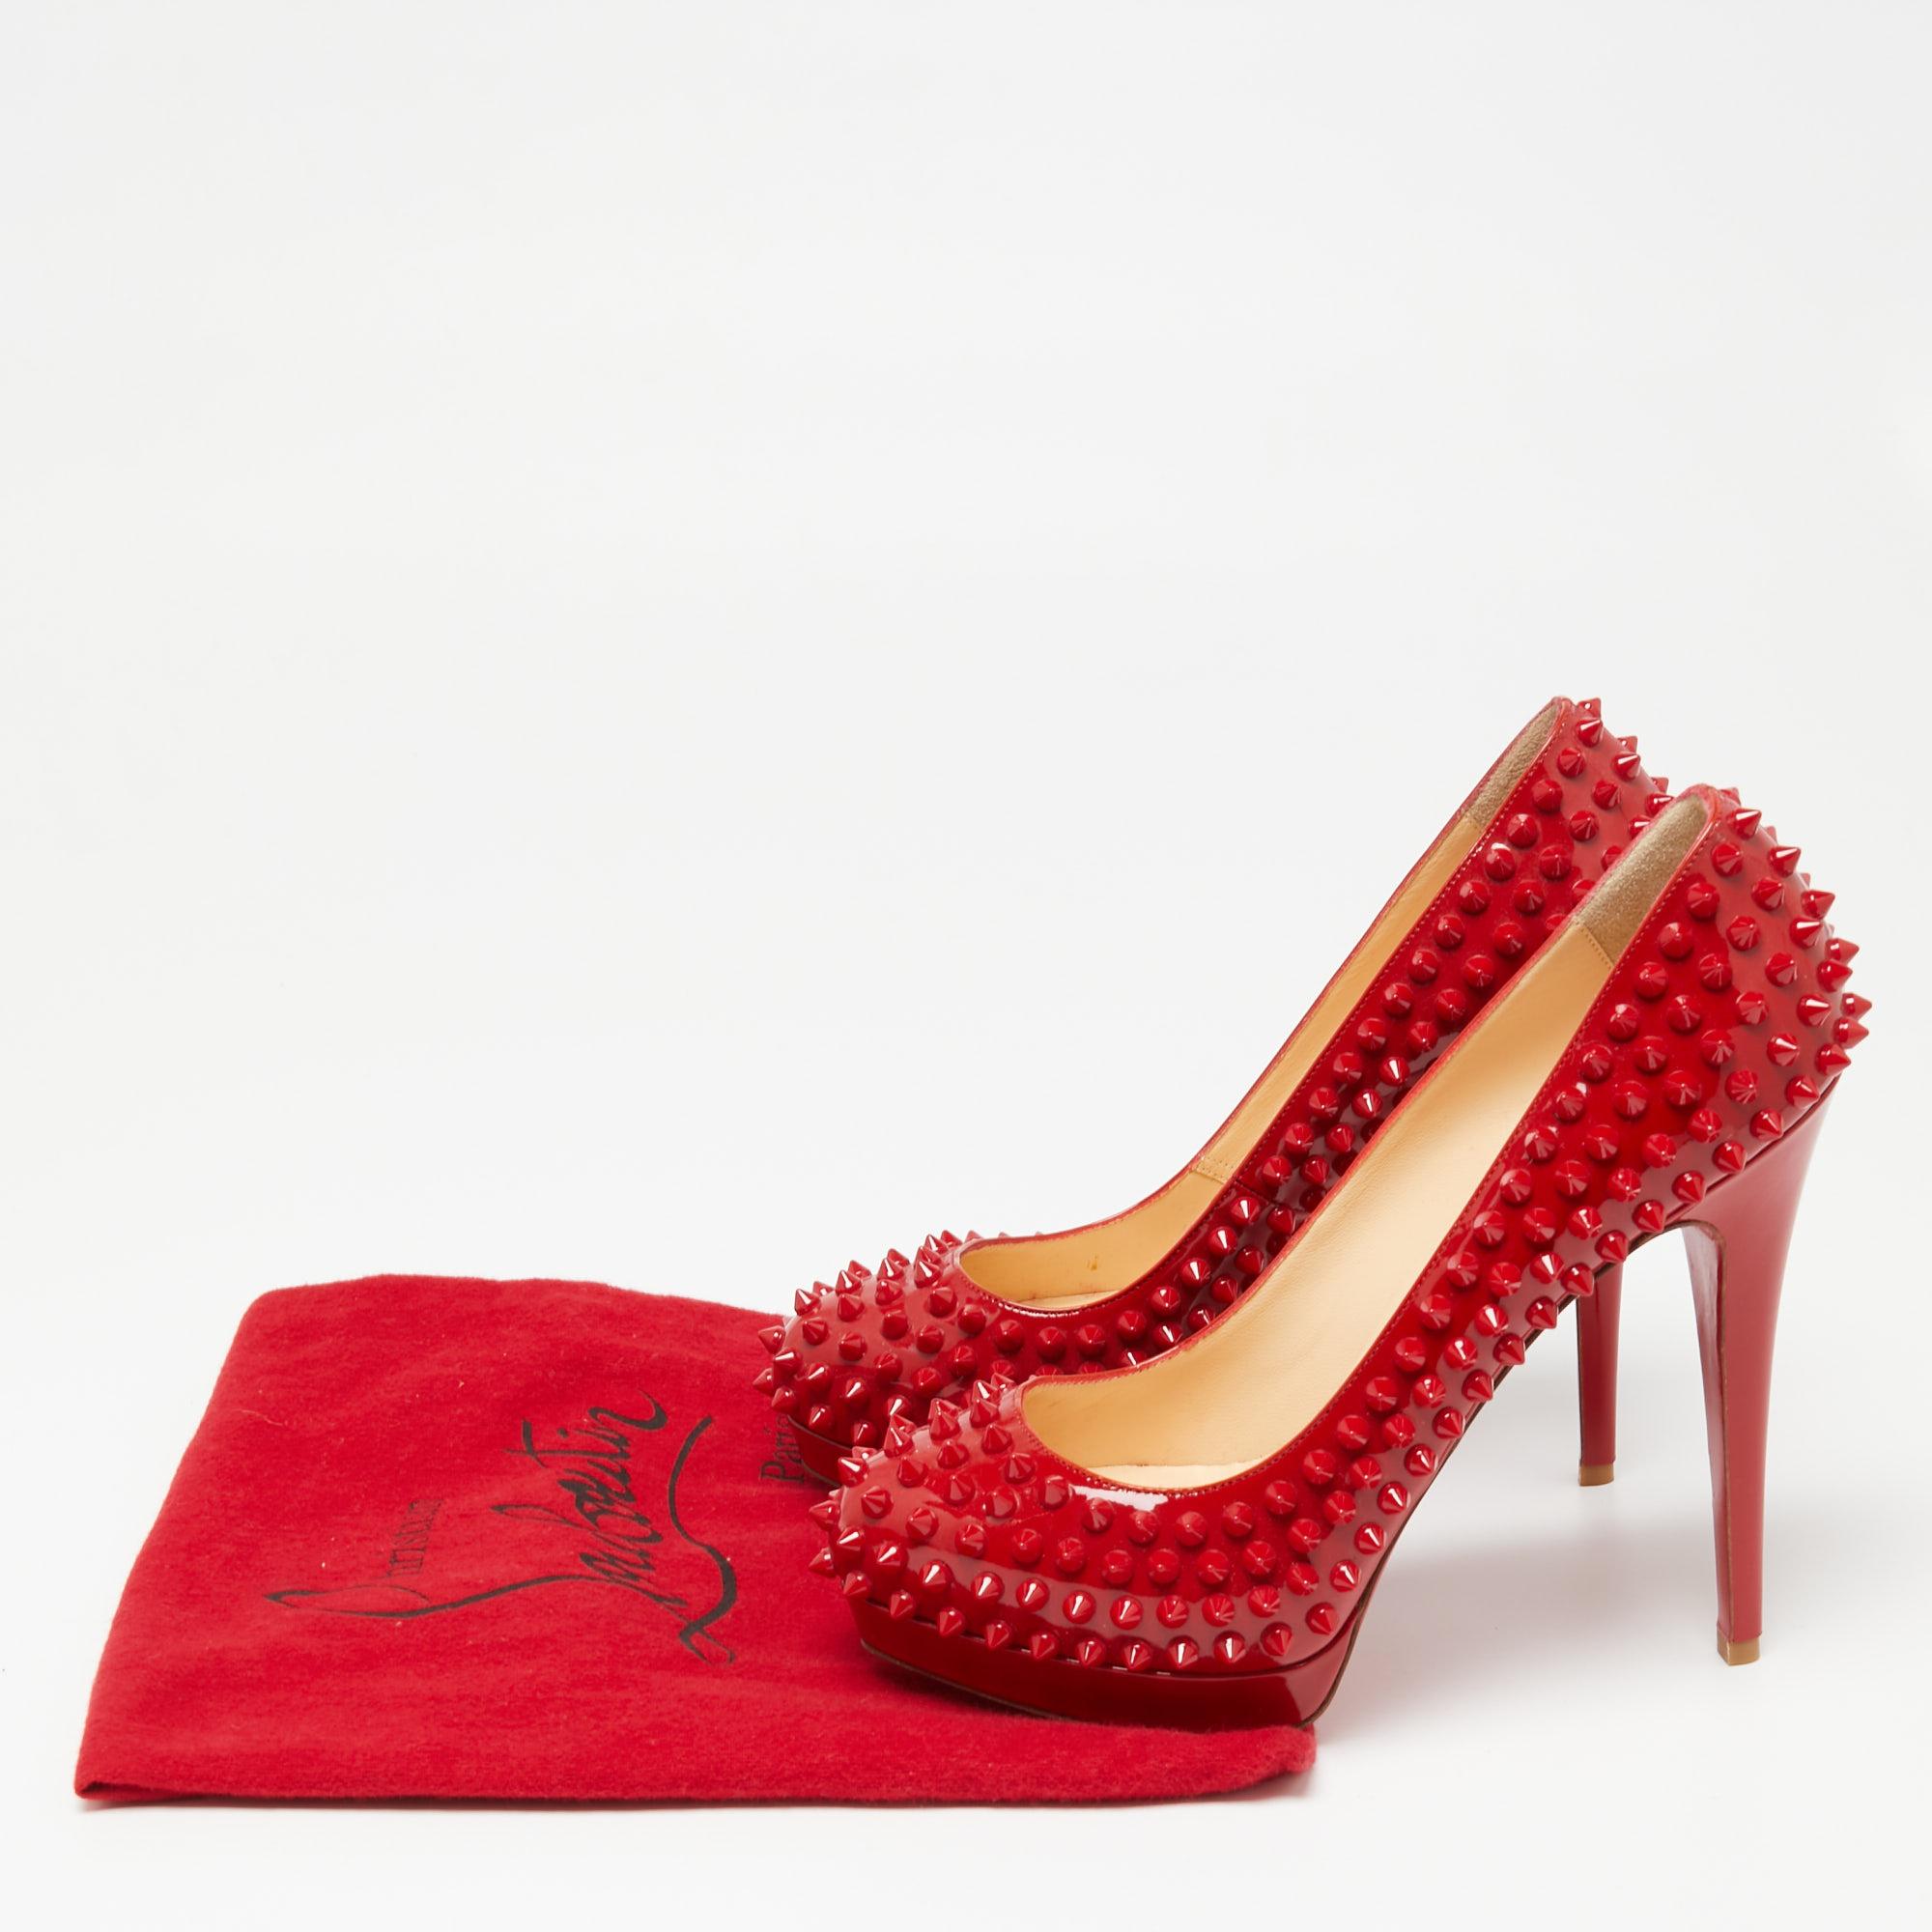 Christian Louboutin Red Patent Leather Pigalle Spikes Platform Pumps Size 38 2